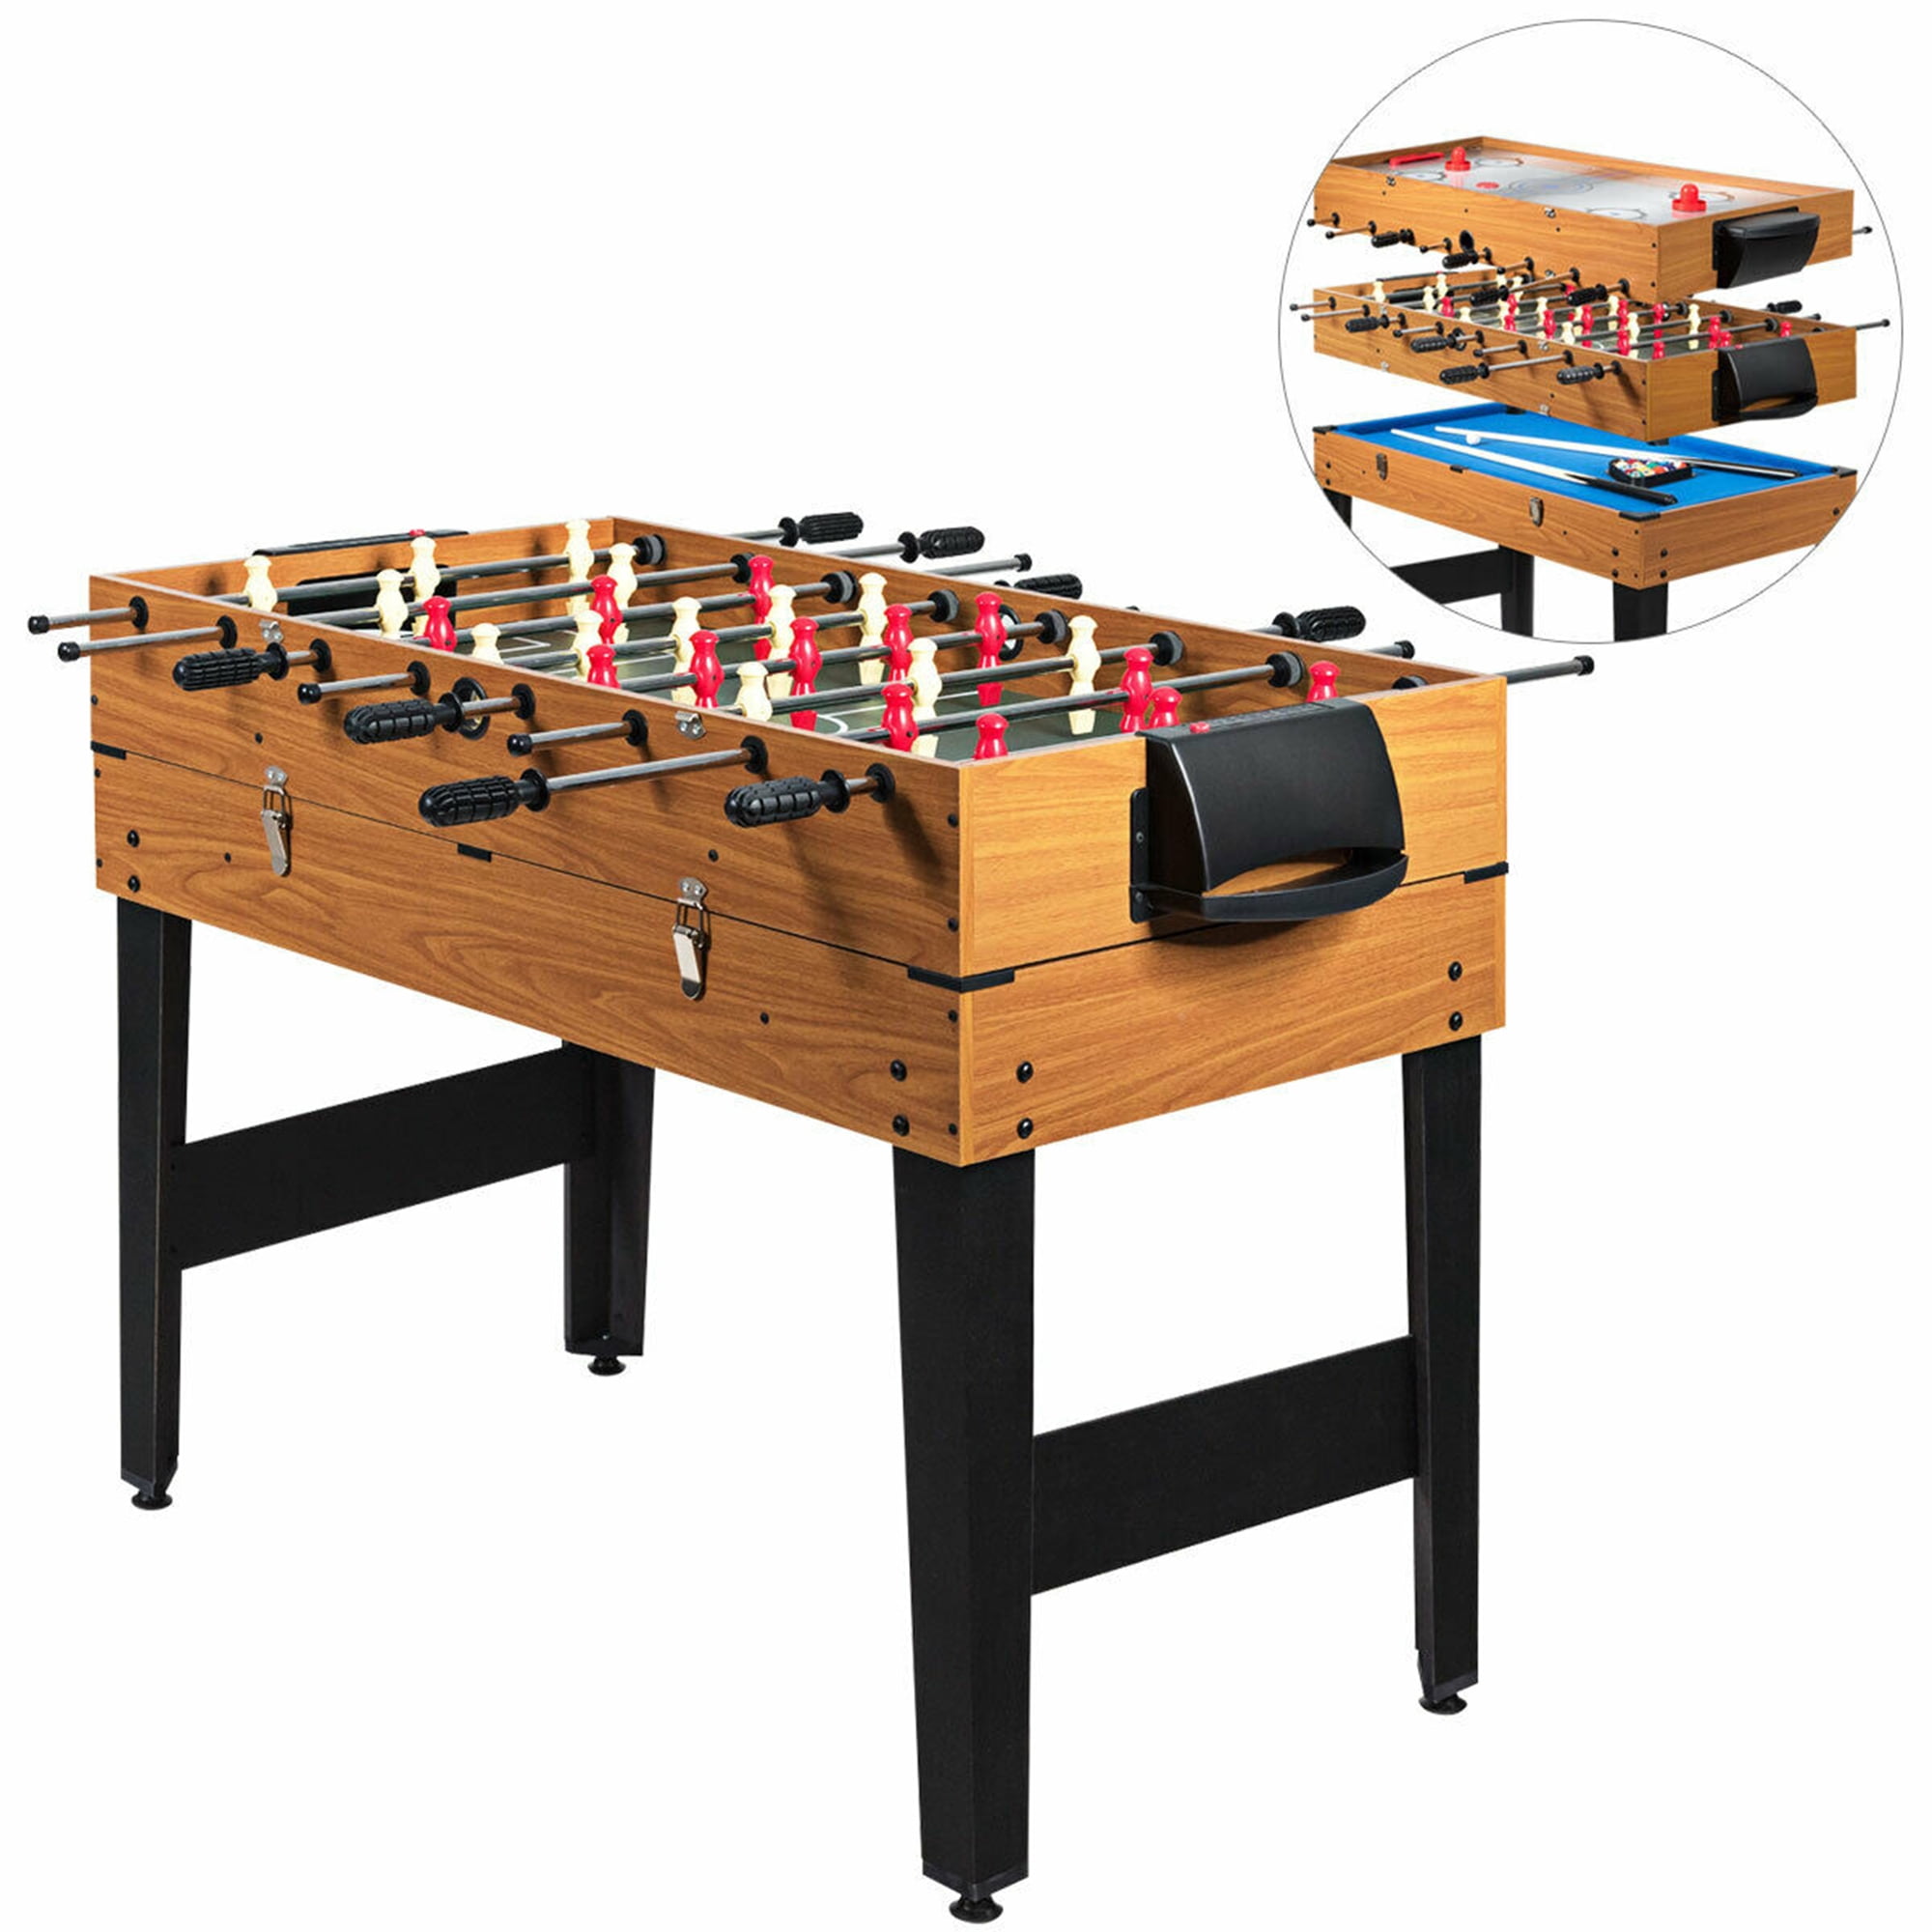 GYMAX 48 Foosball Table Game Room Indoor Soccer Wood Game Table w/ 2 Balls Home Competition Sized & Multi Person Table Soccer for Adults 